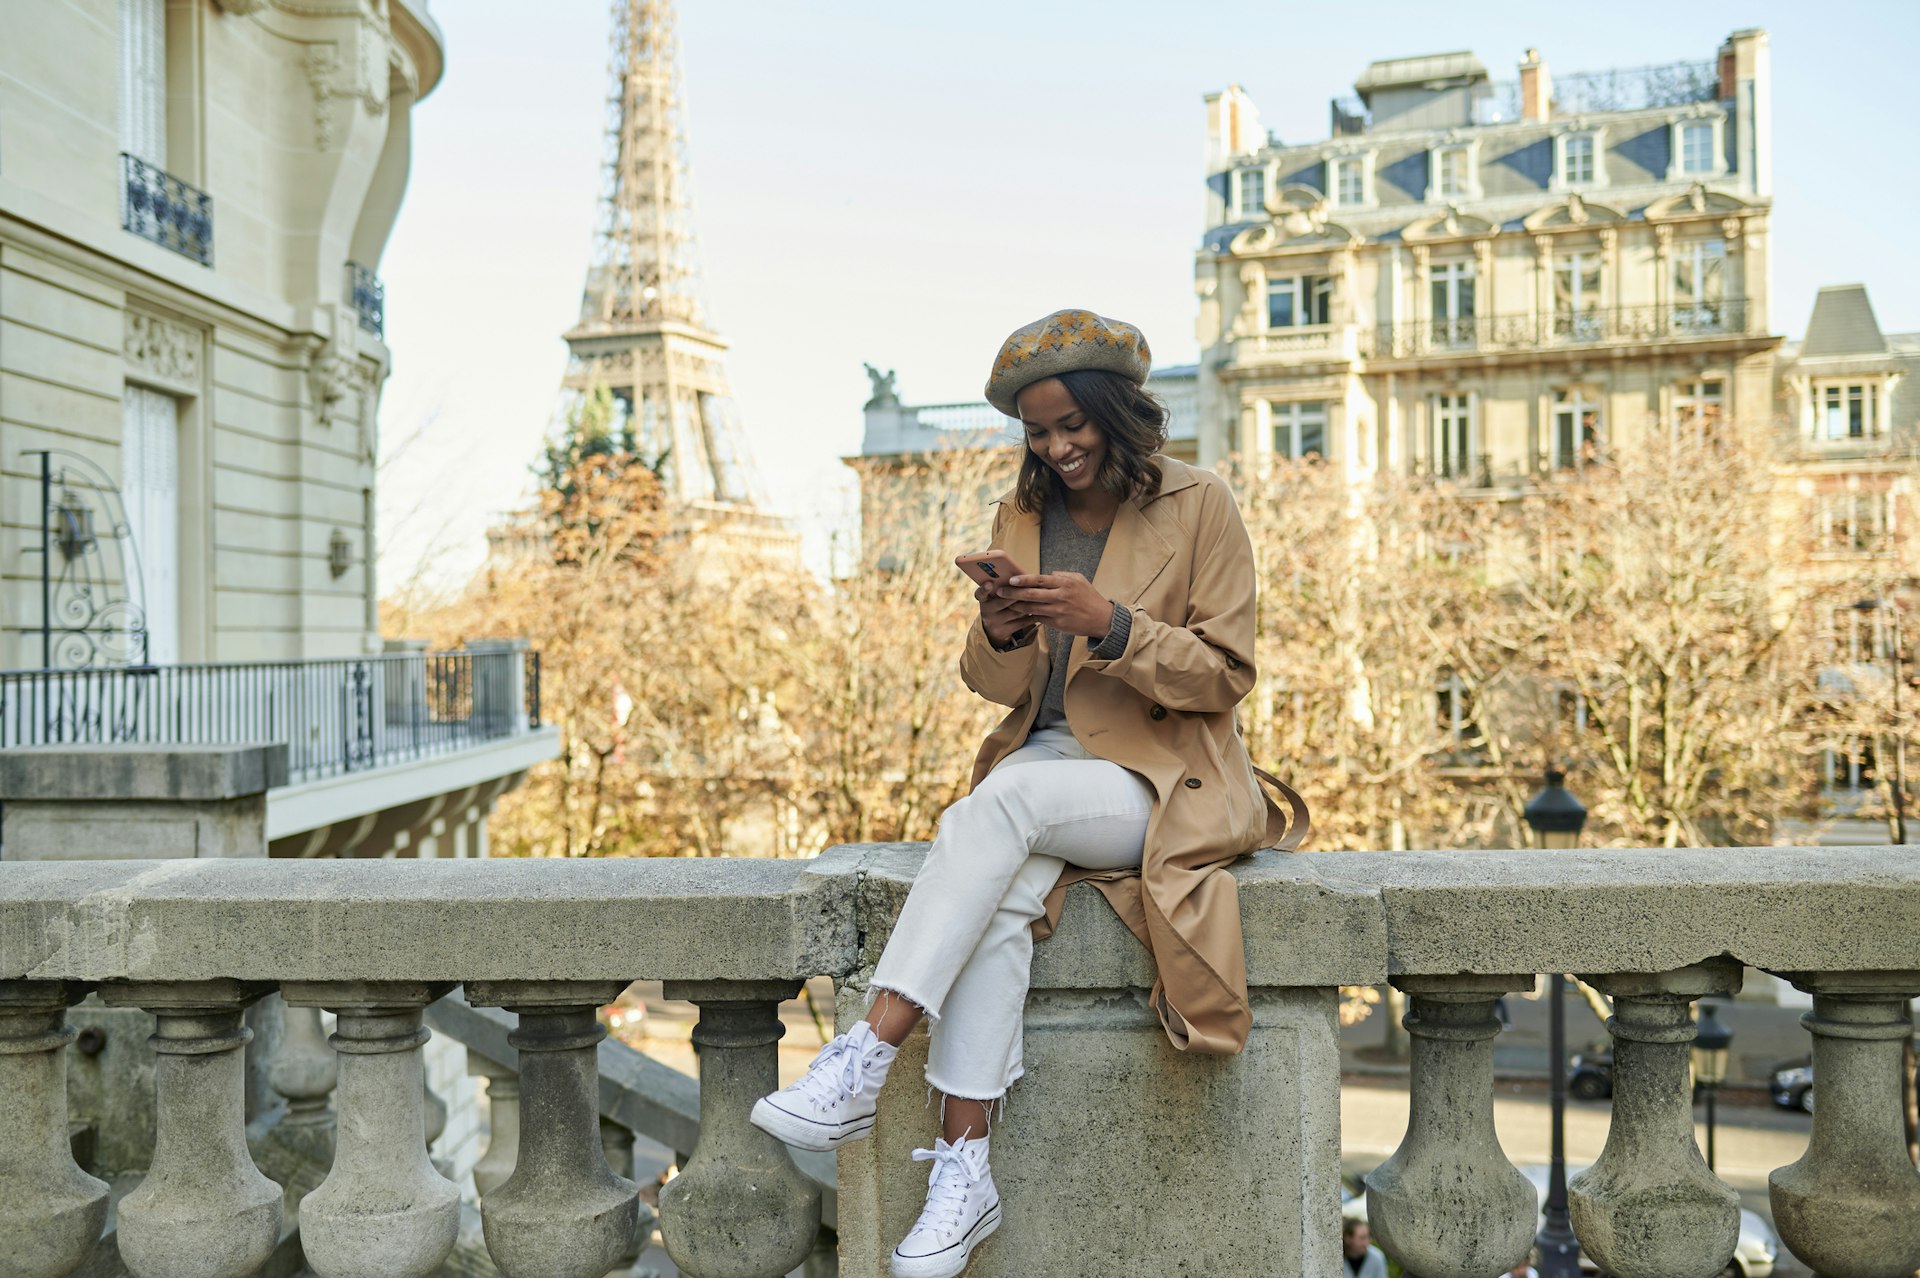 A woman using a mobile phone on a street in Paris with the Eiffel Tower in the background